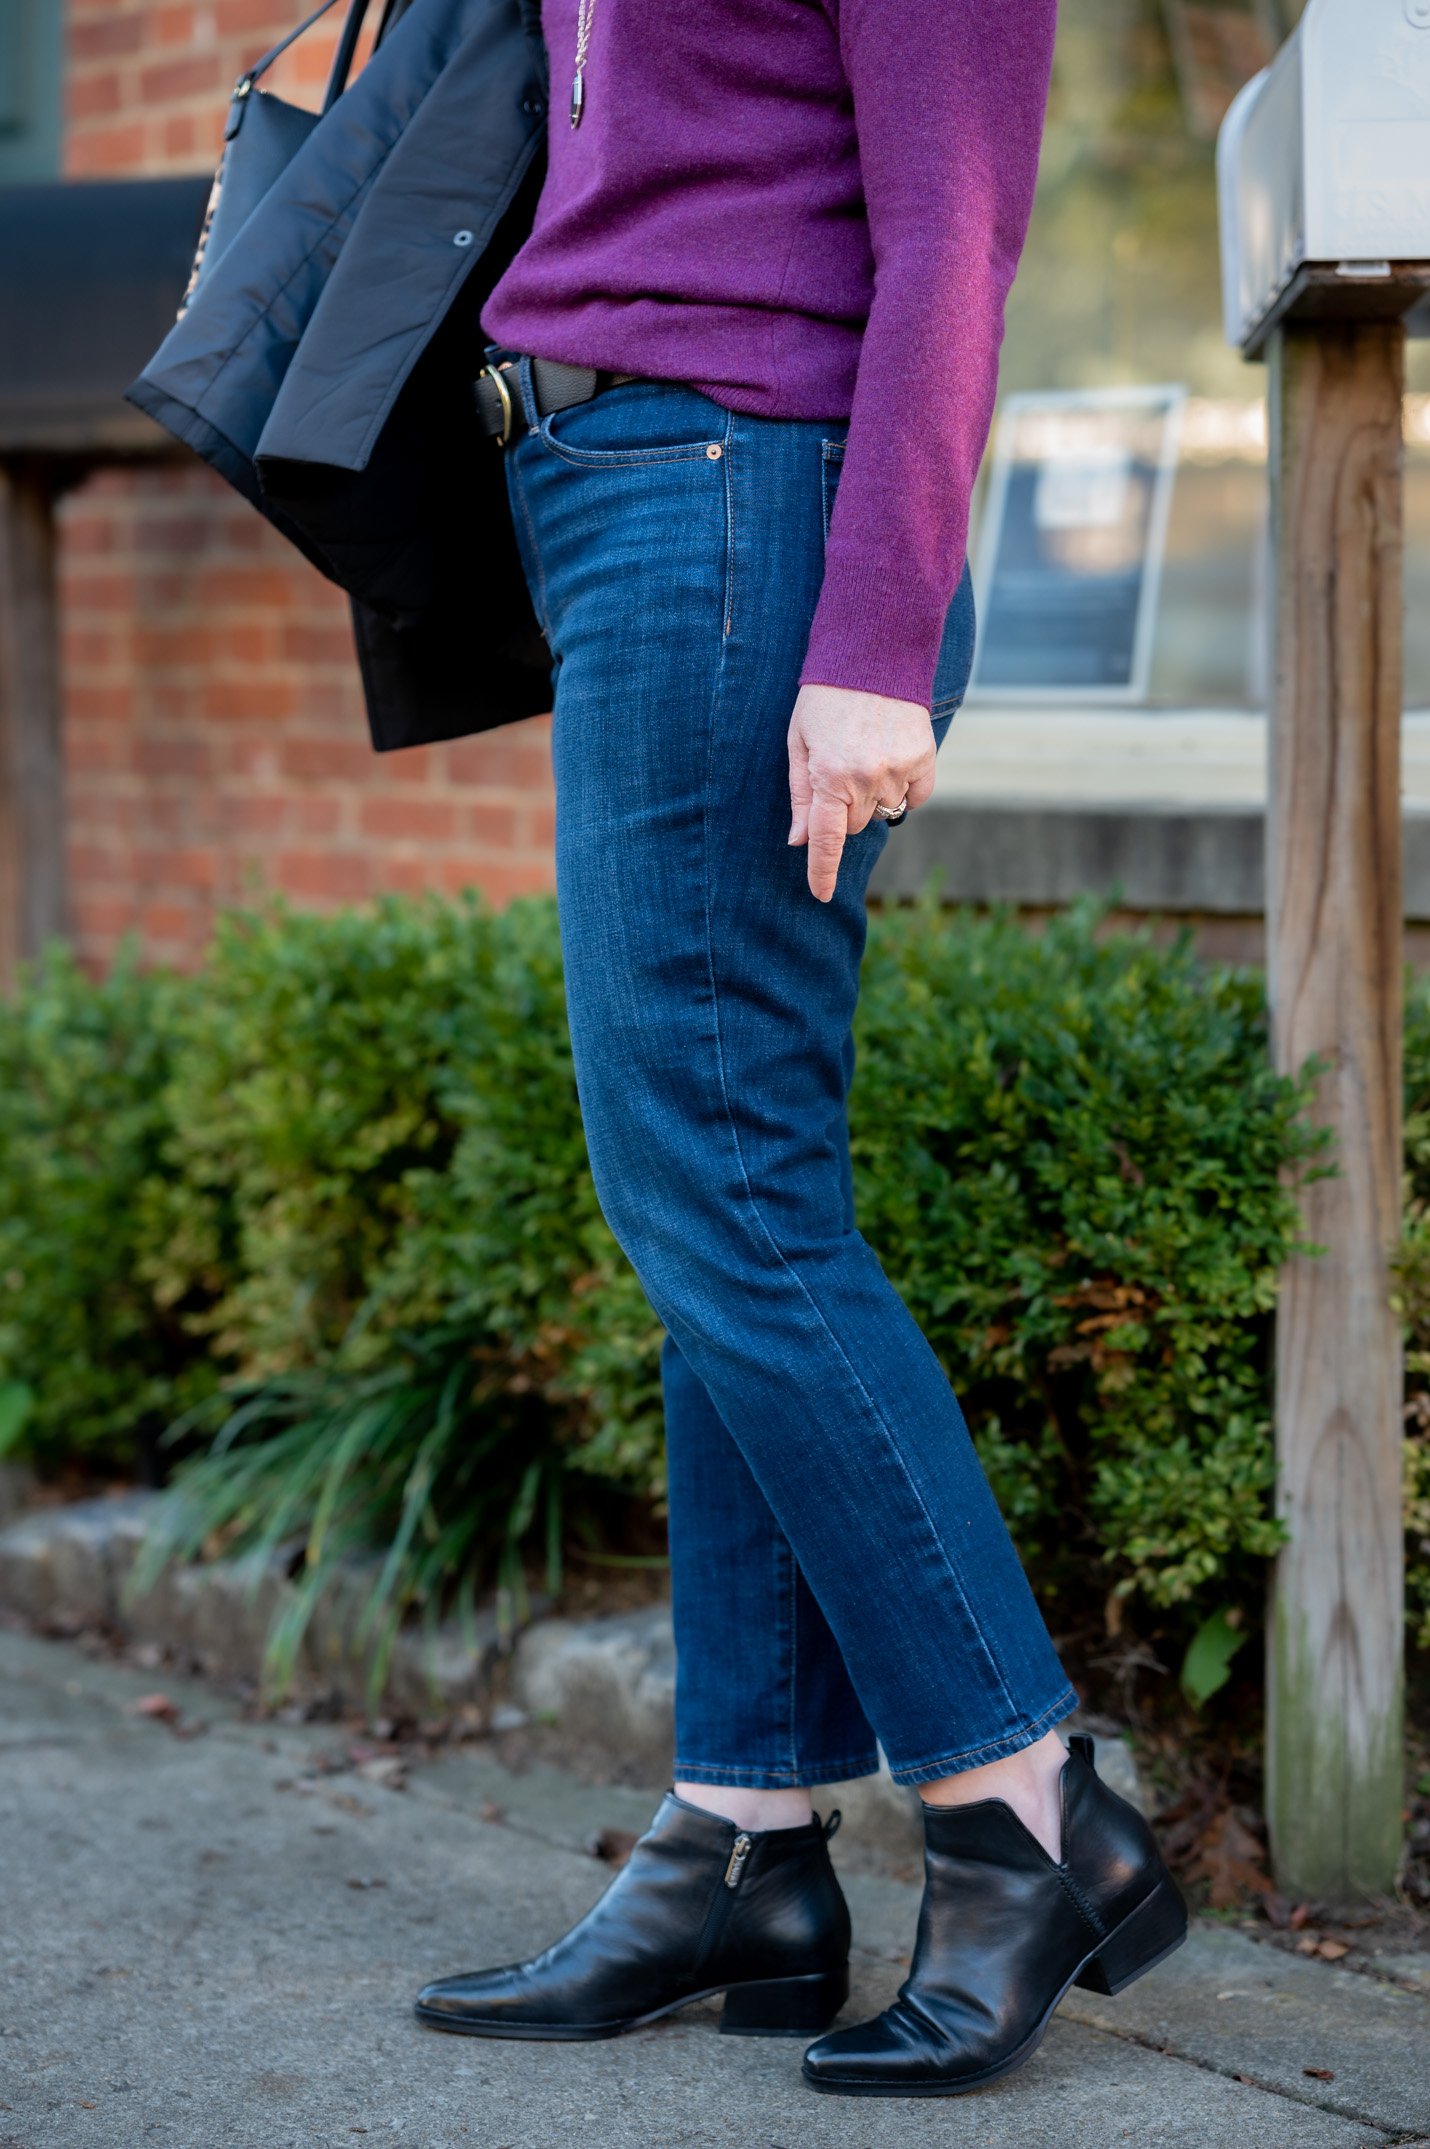 Ankle Jeans In Fall